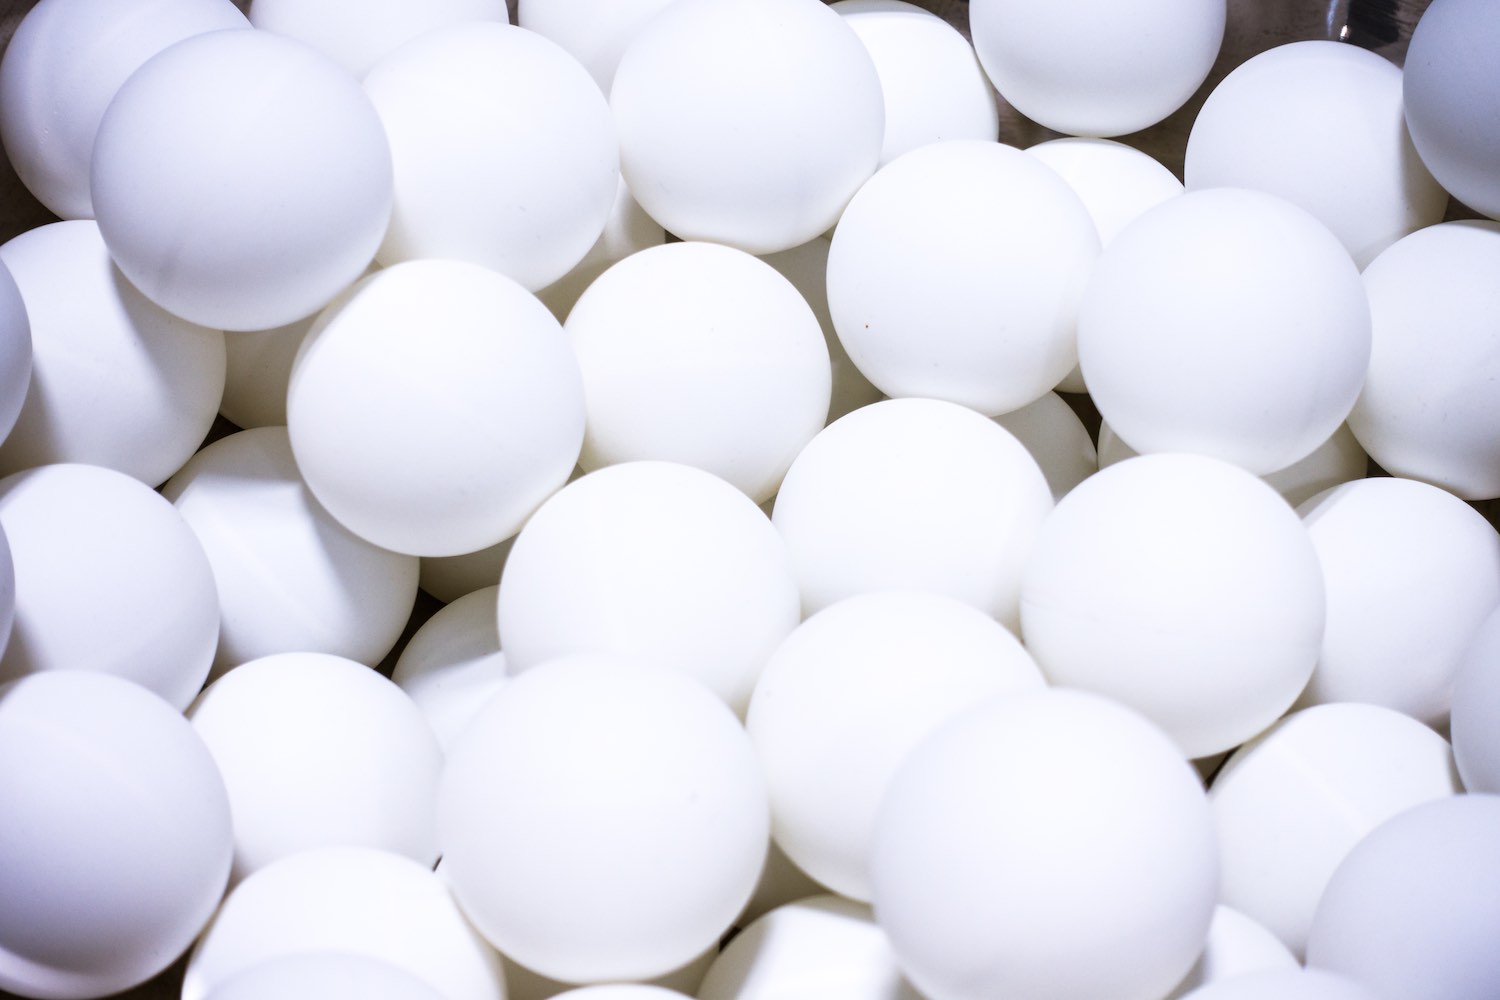 Calculate Ping Pong Balls Needed To Fill A Swimming Pool